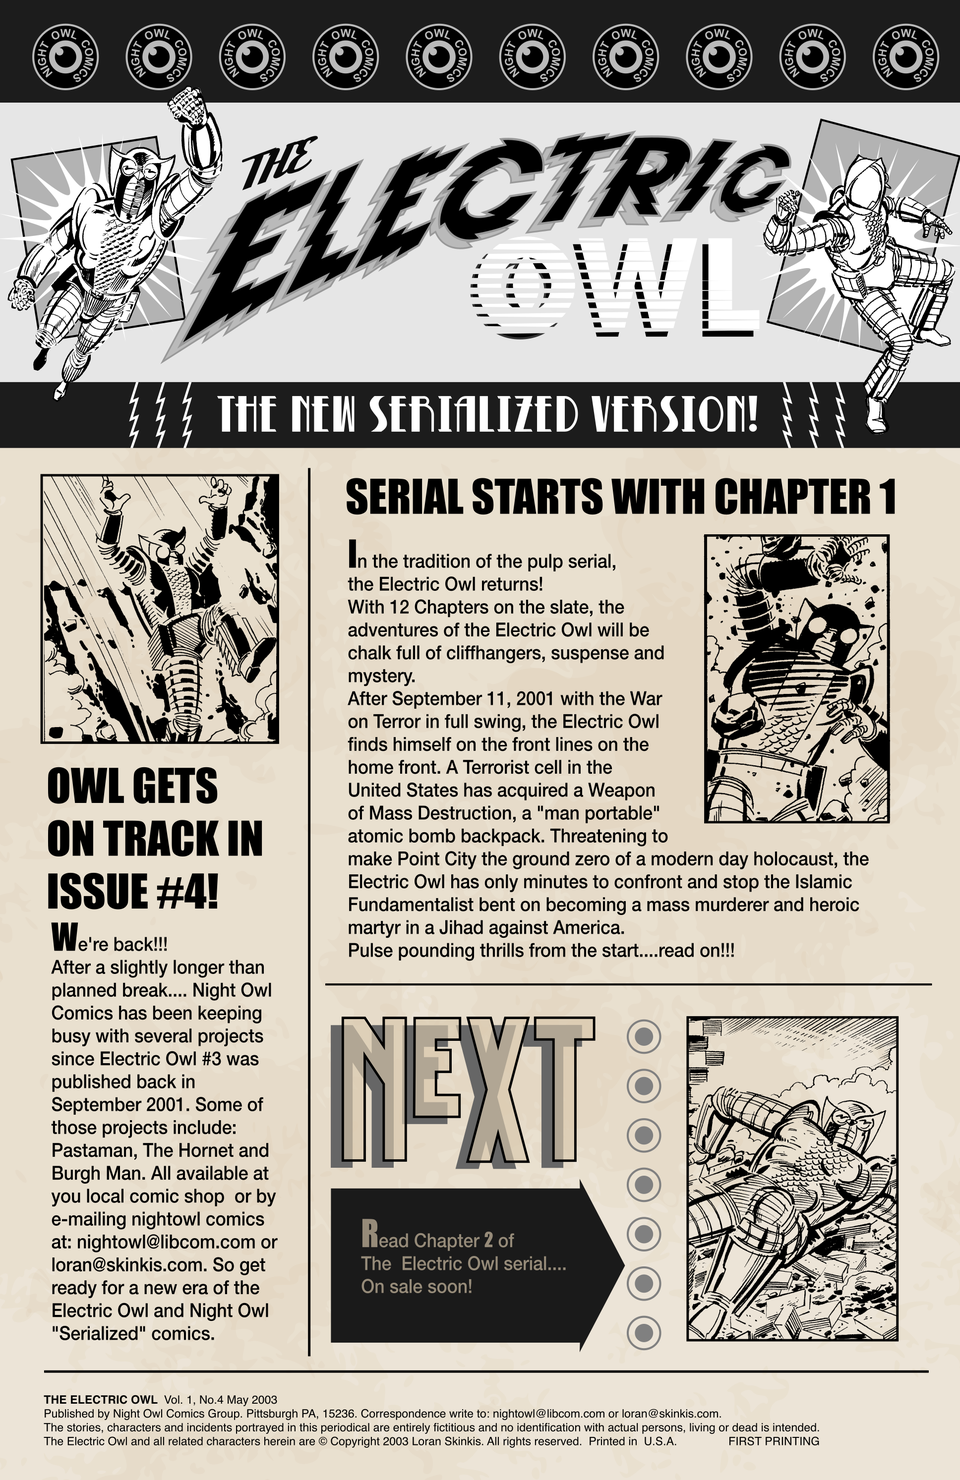 Electric Owl #4 - INSIDE FRONT COVER